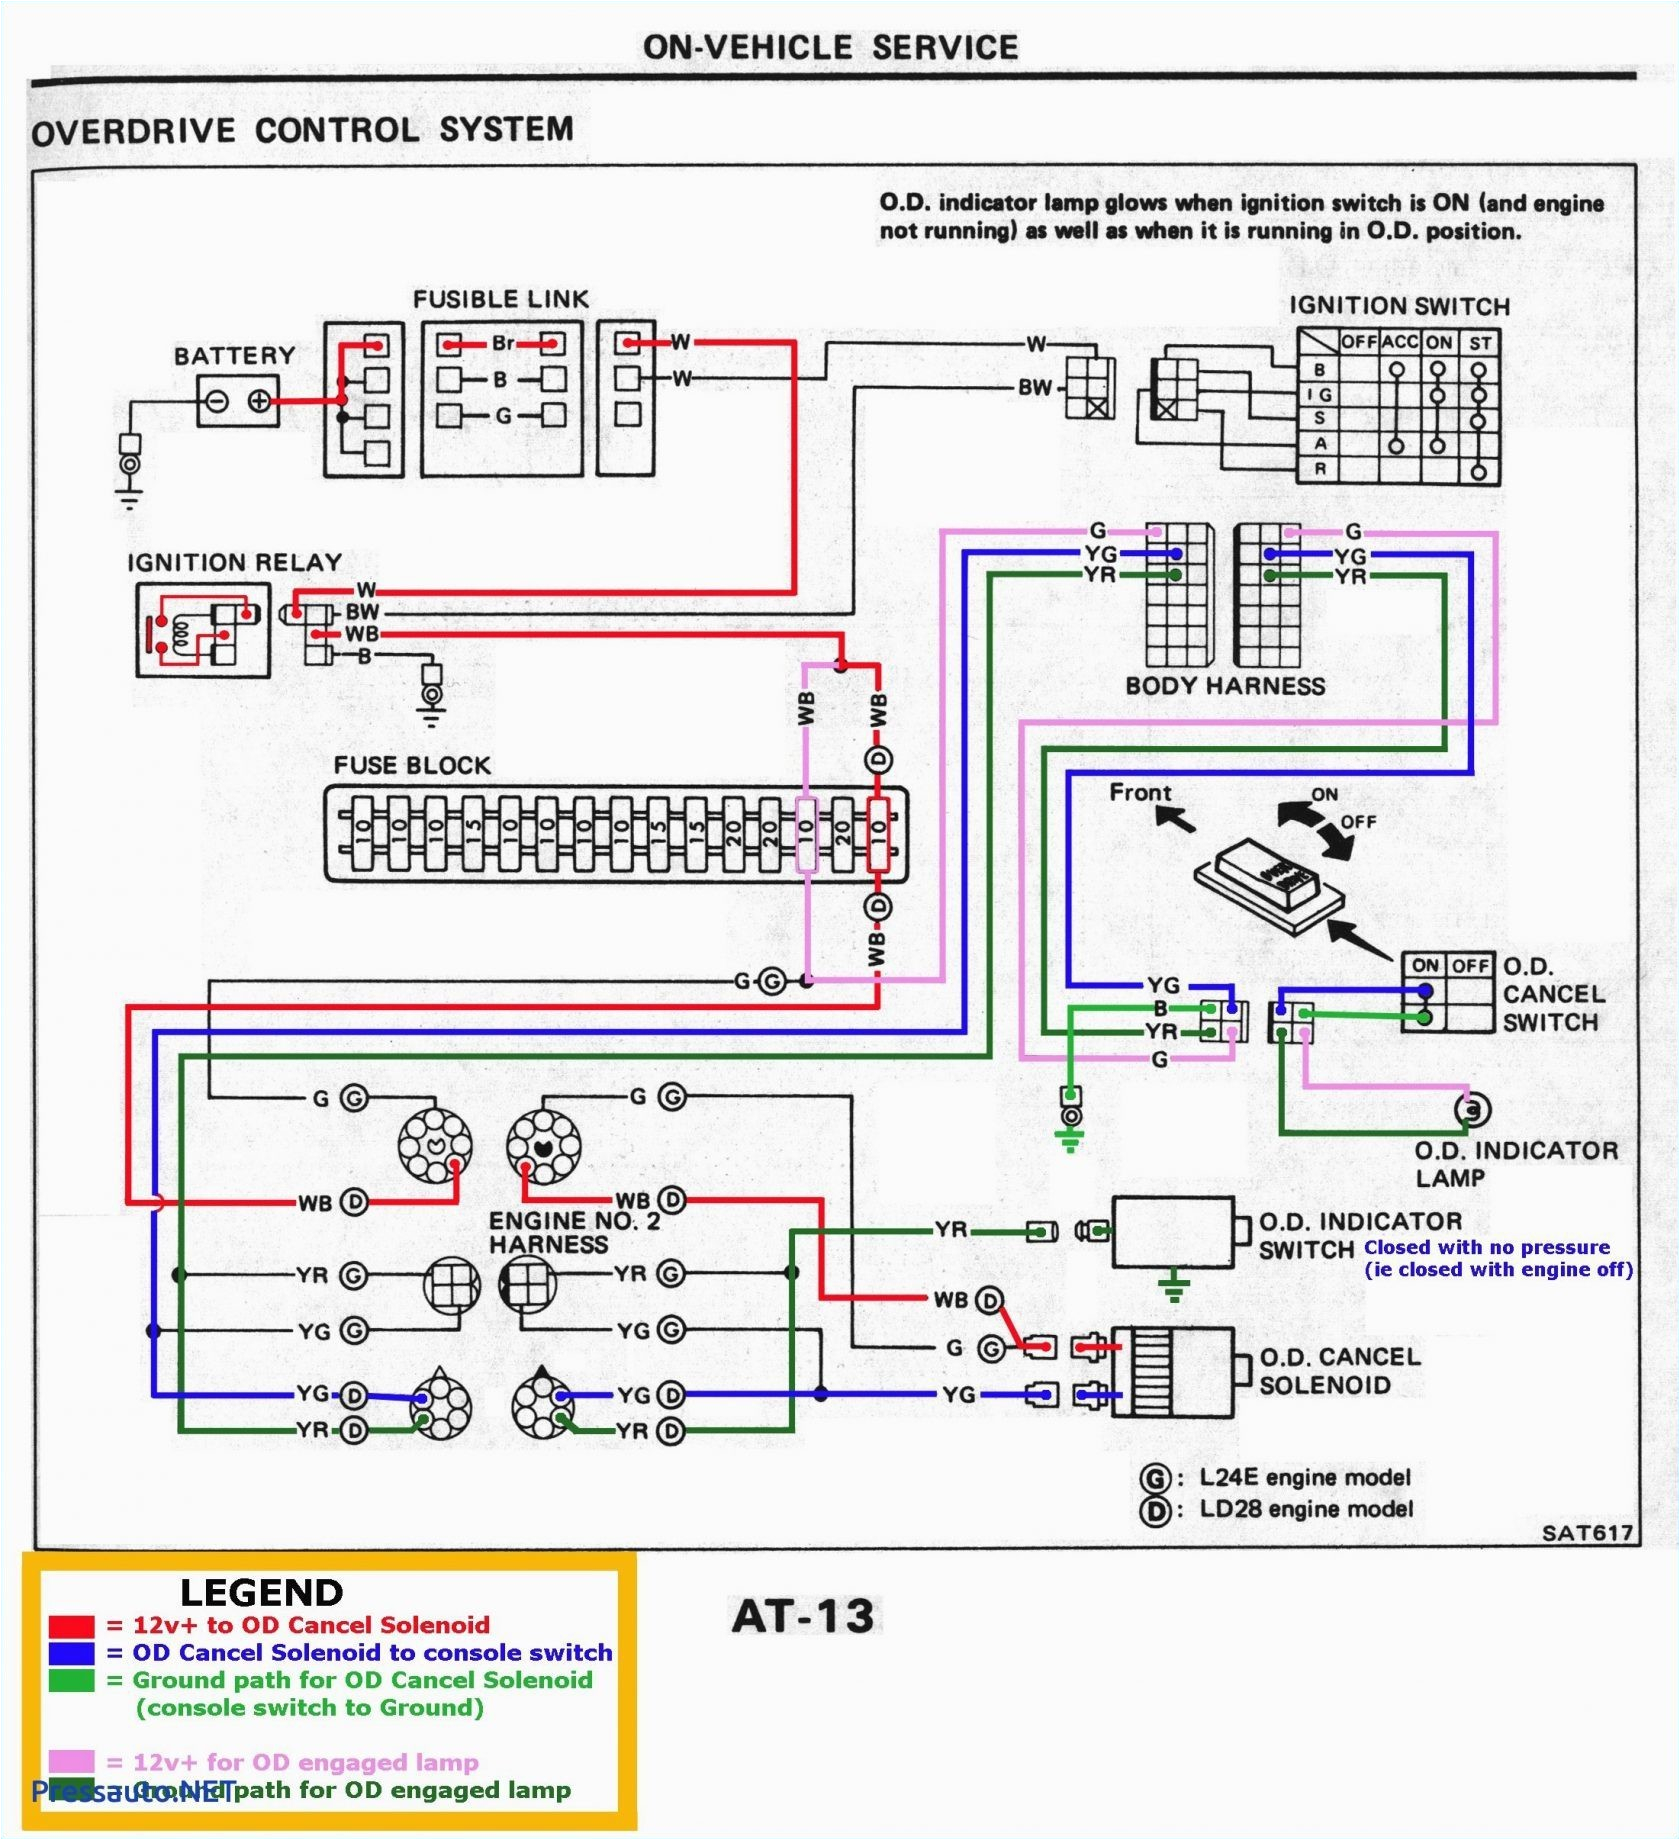 shelby fan wiring diagram wiring diagram view shelby dakota ignition wiring diagram wiring diagram ame shelby